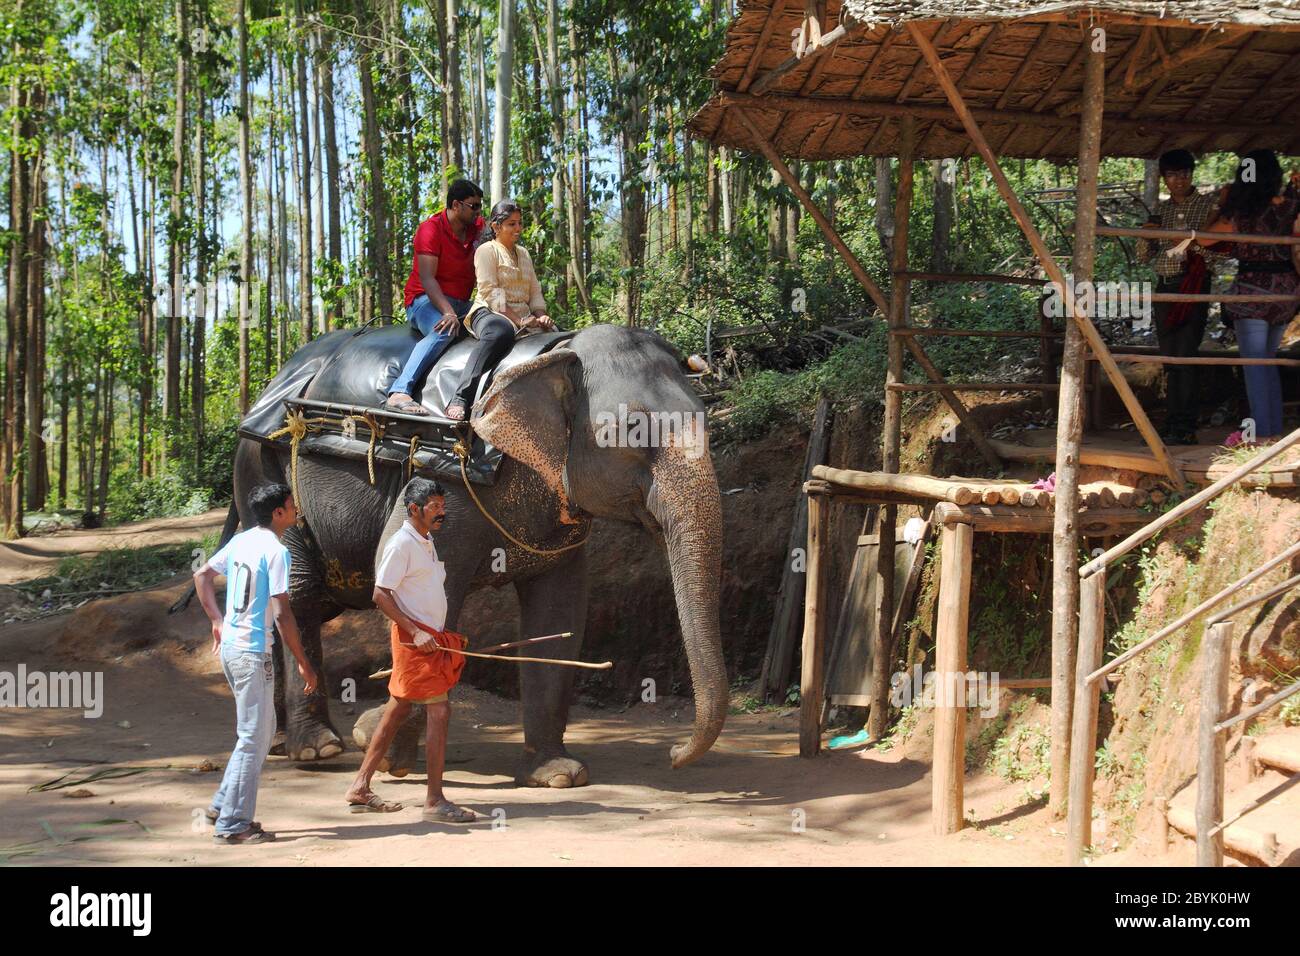 Tourists ride on elephants in the jungle Stock Photo